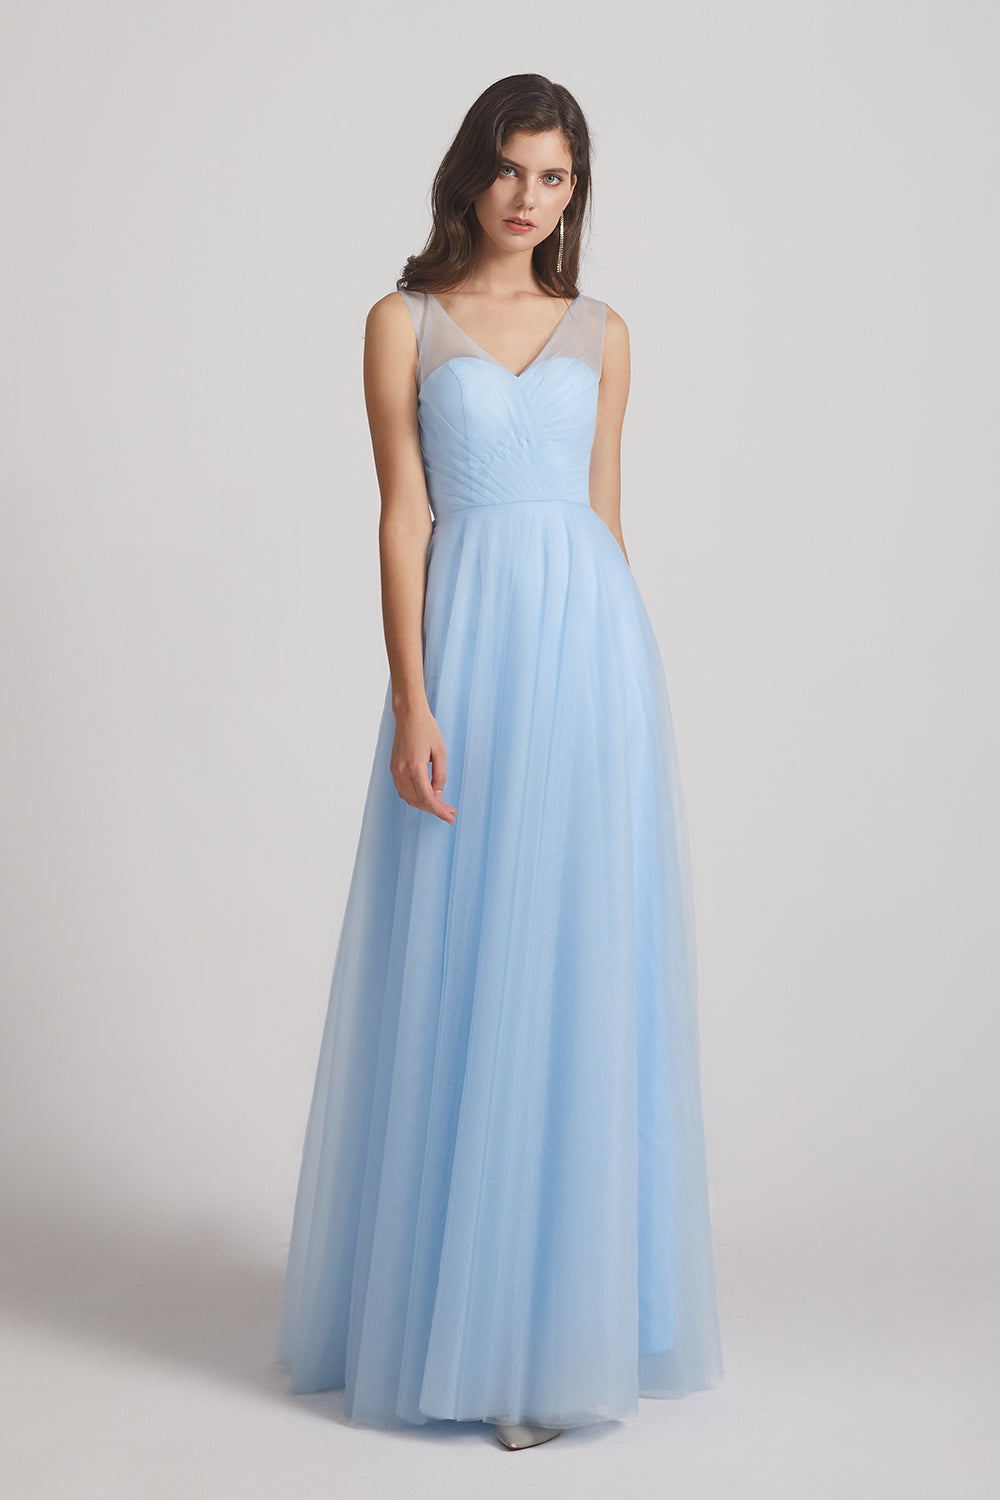 Baby Blue Bridesmaid Gowns